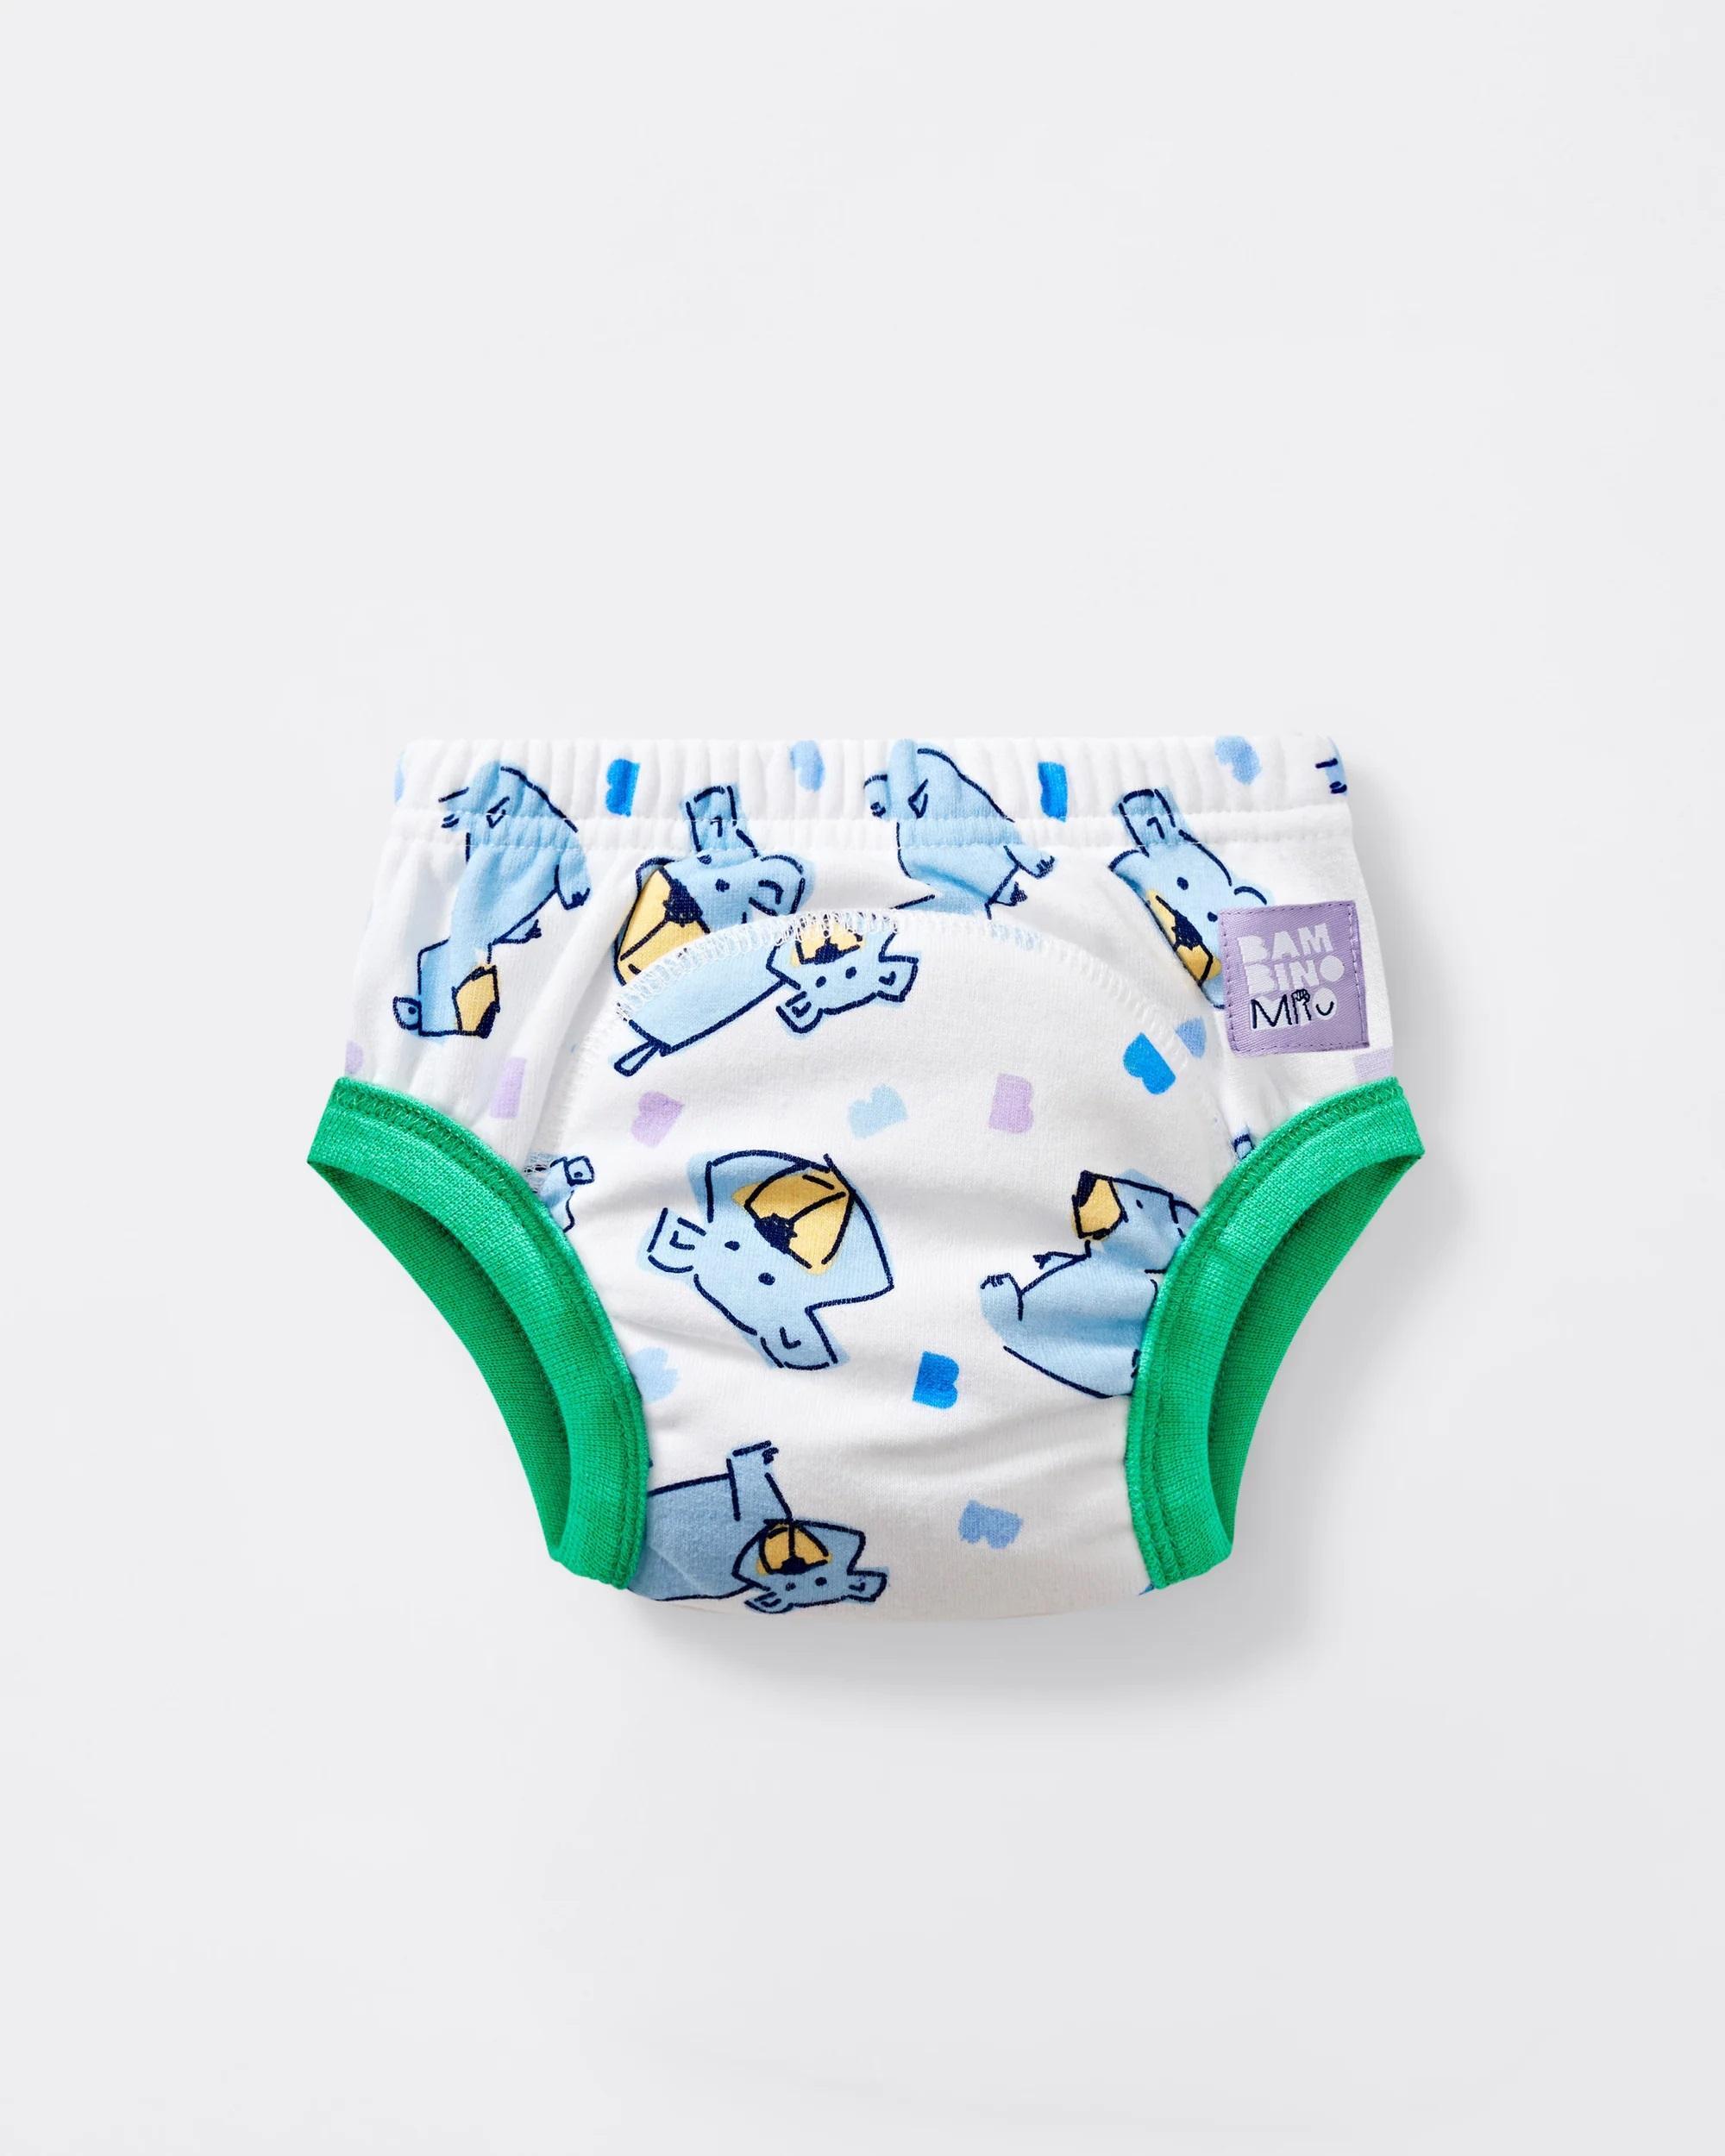 https://www.nordbaby.com/products/images/g130000/131830/nappies-and-covers-bambino-mio-chomp-bambino-mio-potty-training-pants-chomp-131830-82062.jpg